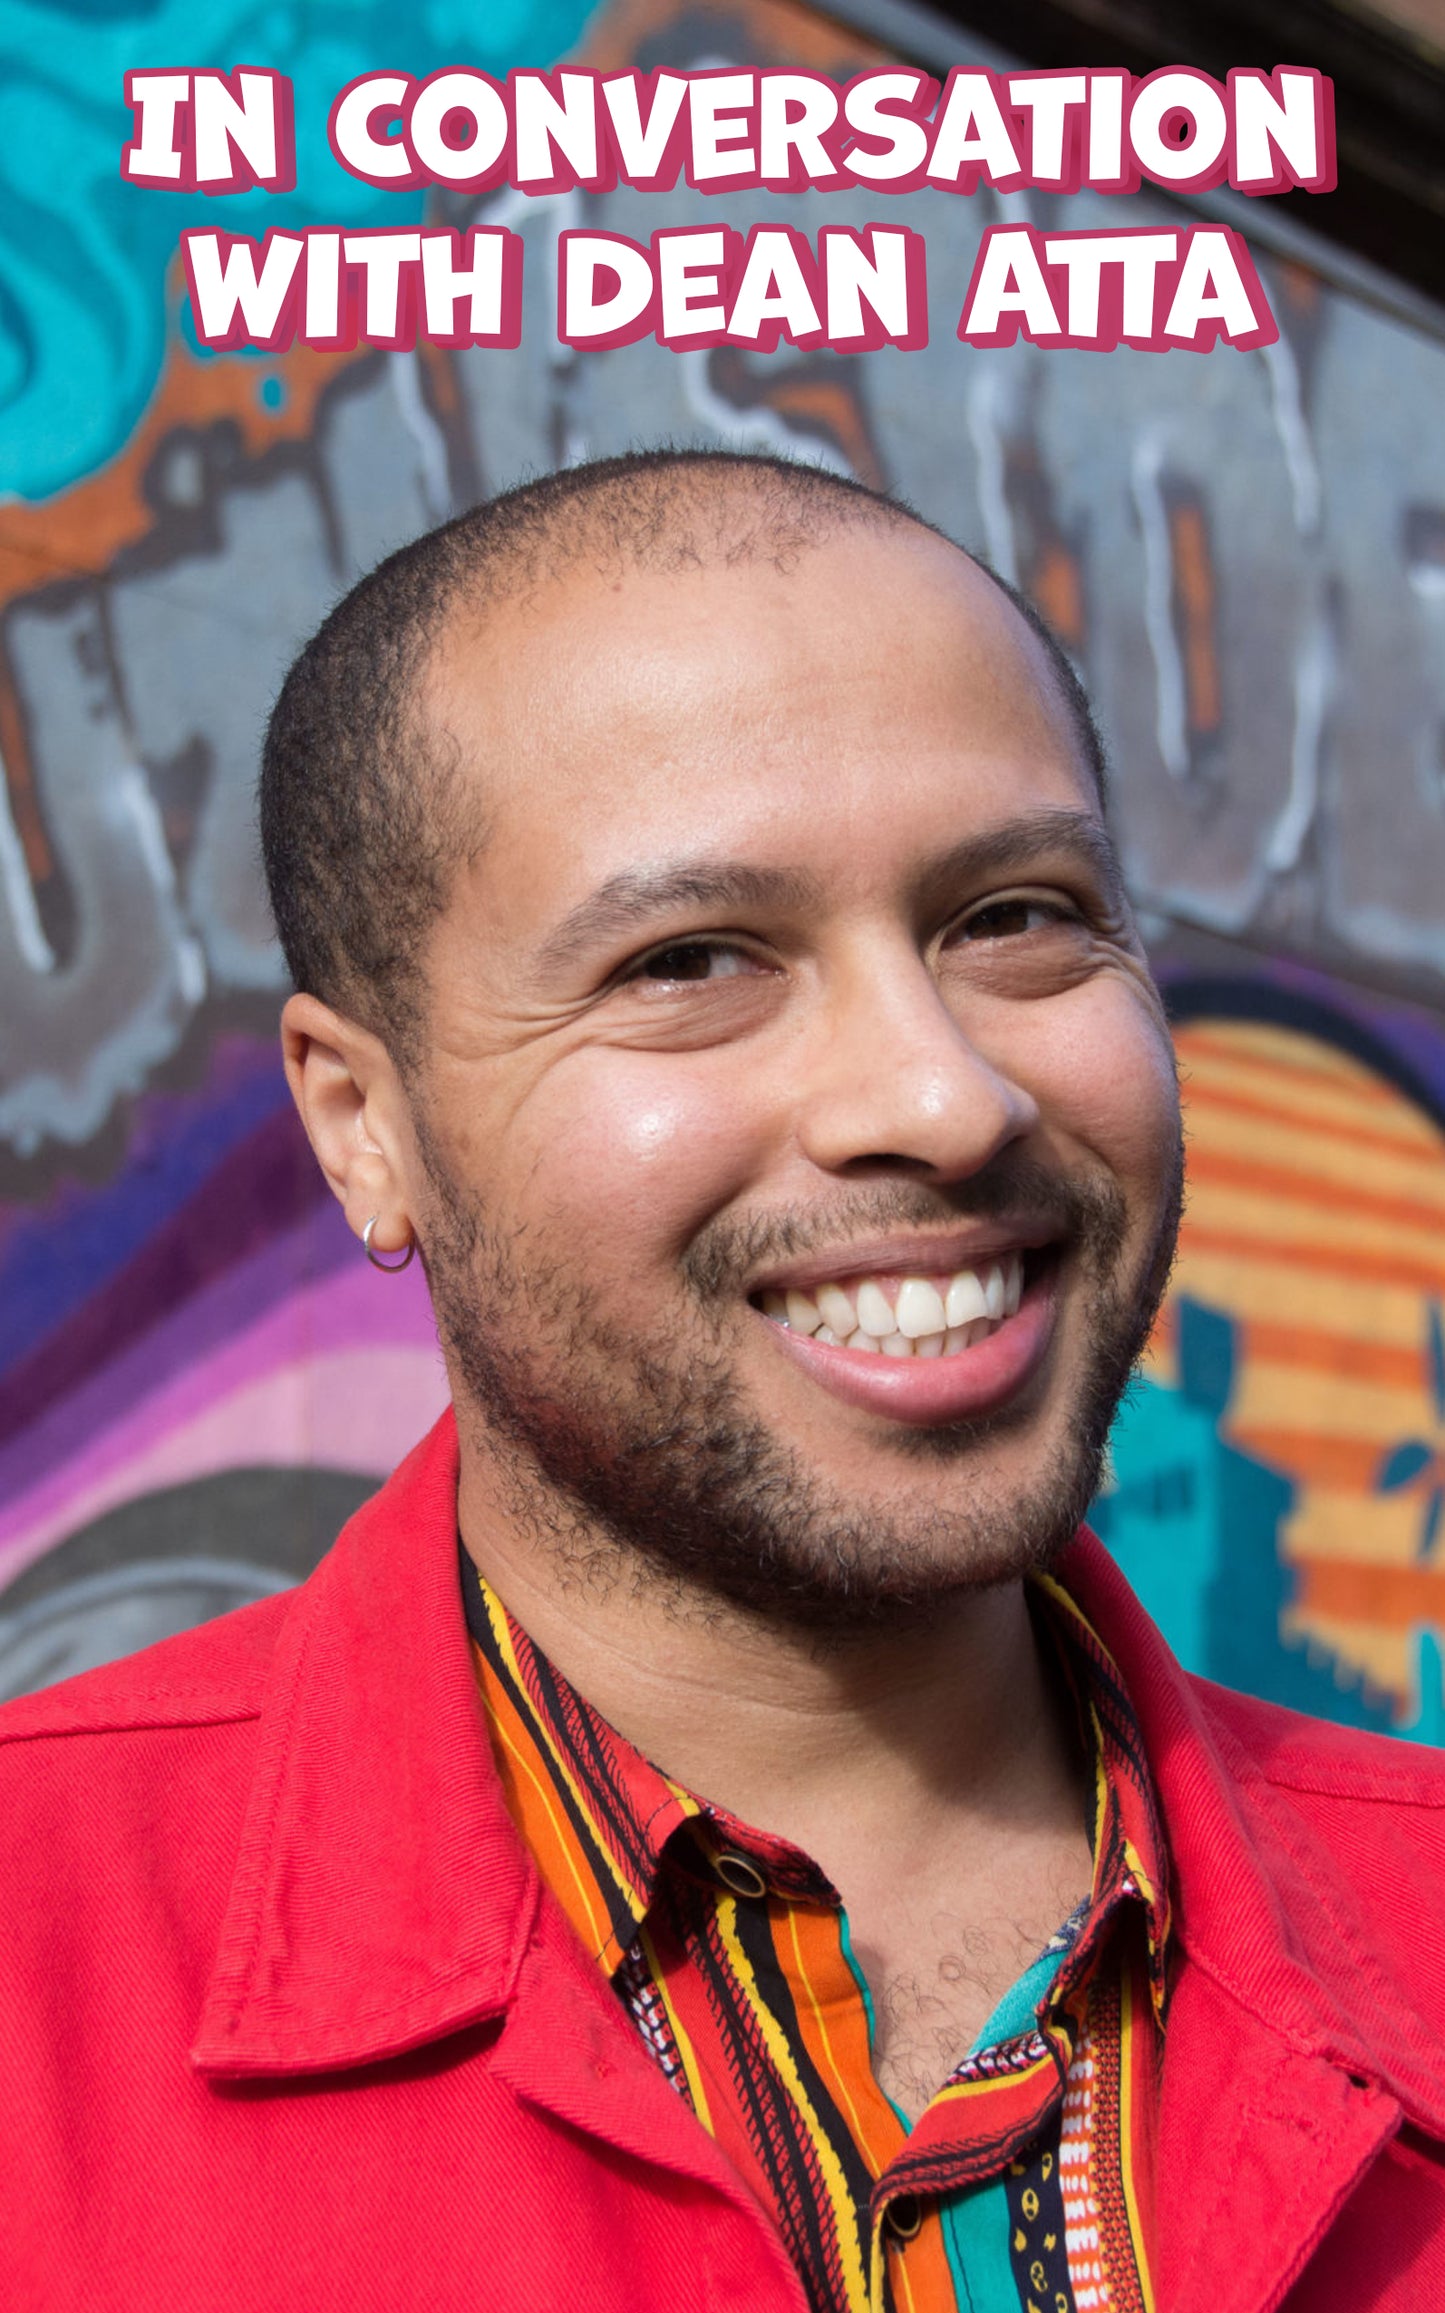 Dean Atta, a black man with short black hair, smiles at the camera cheerily while wearing a colourful shirt and red jacket. Above him is white text that reads "In Conversation with Dean Atta."